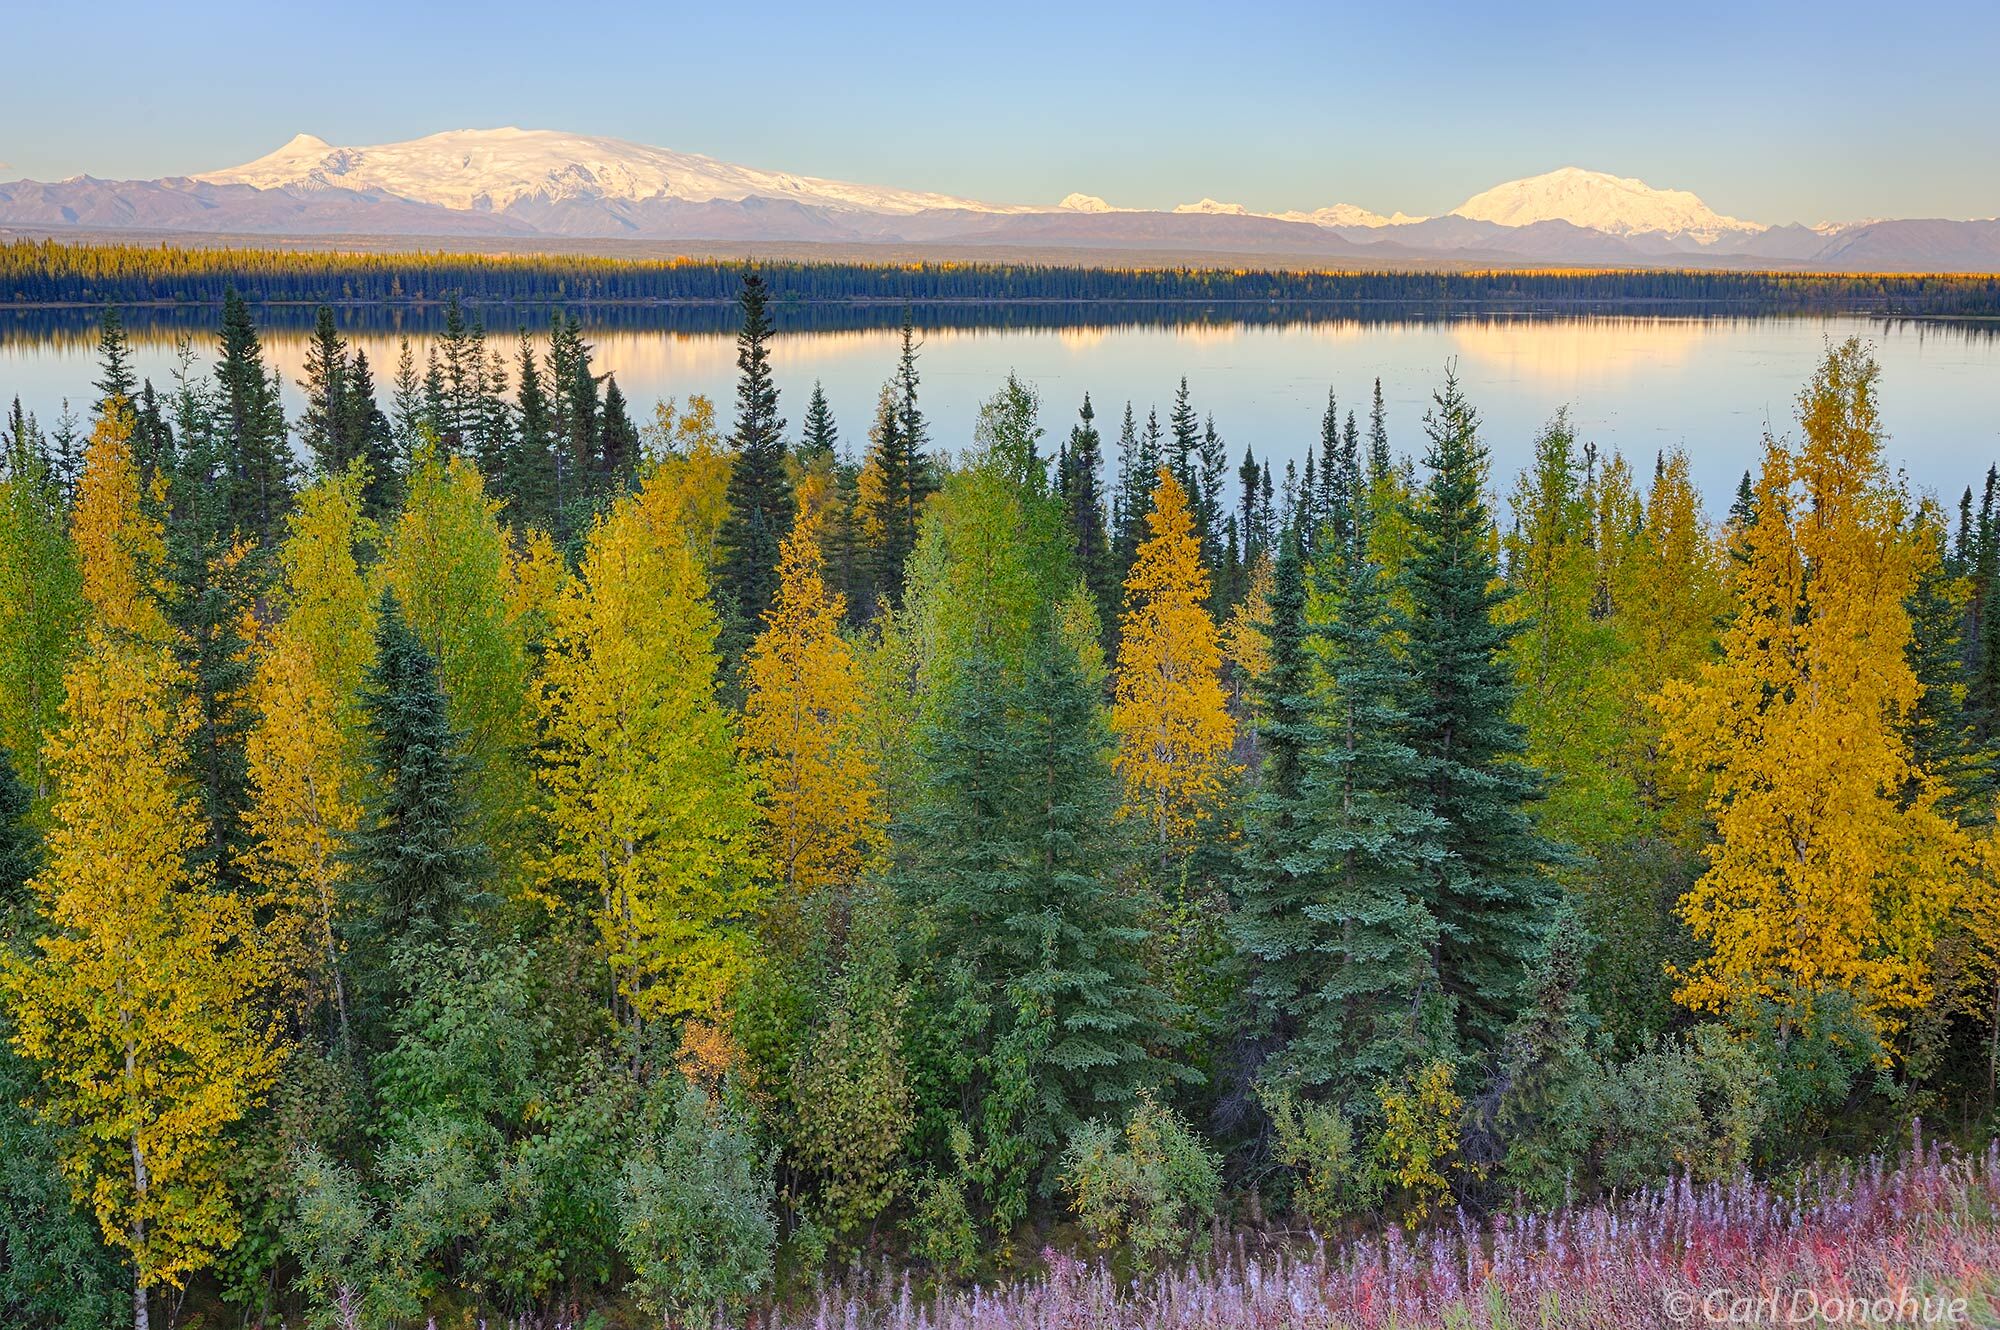 Wrangell Mountains from the Richardson Highway, fall colors, Wrangell - St. Elias National Park and Preserve, Alaska.